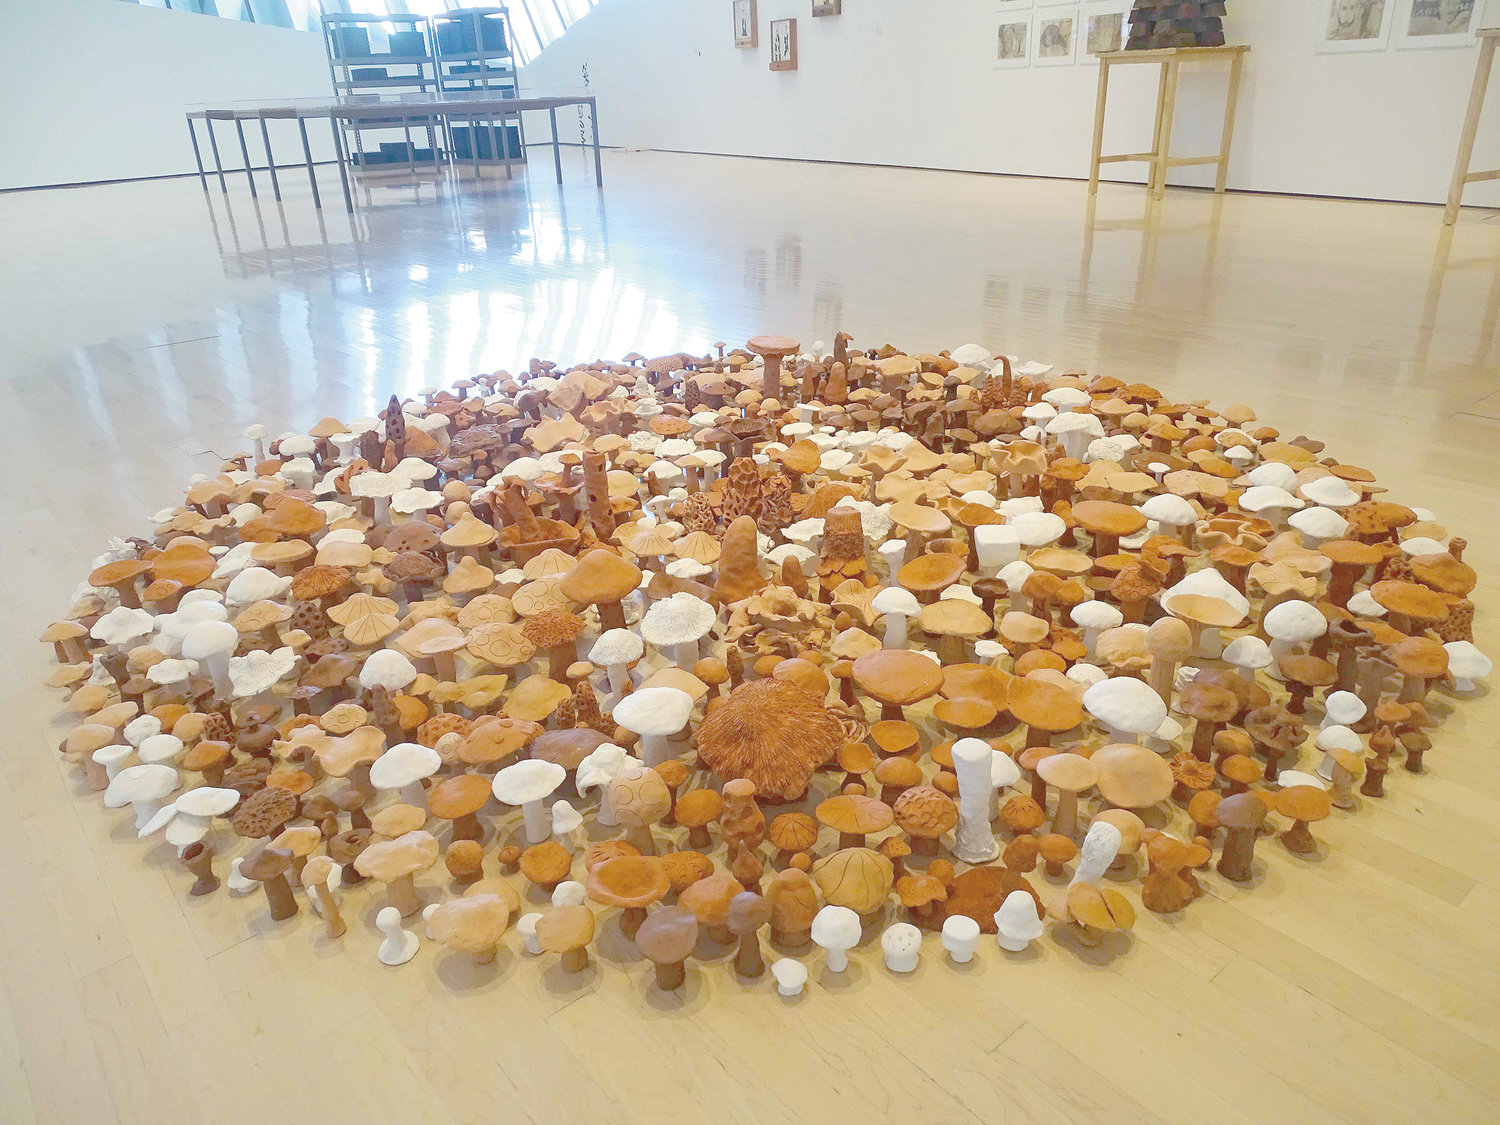 Students in Sao Paulo helped Spanish artist Antonio Ballester Moreno.create this charming circle of mushrooms that currently springs from the floor of the Broad Museum.